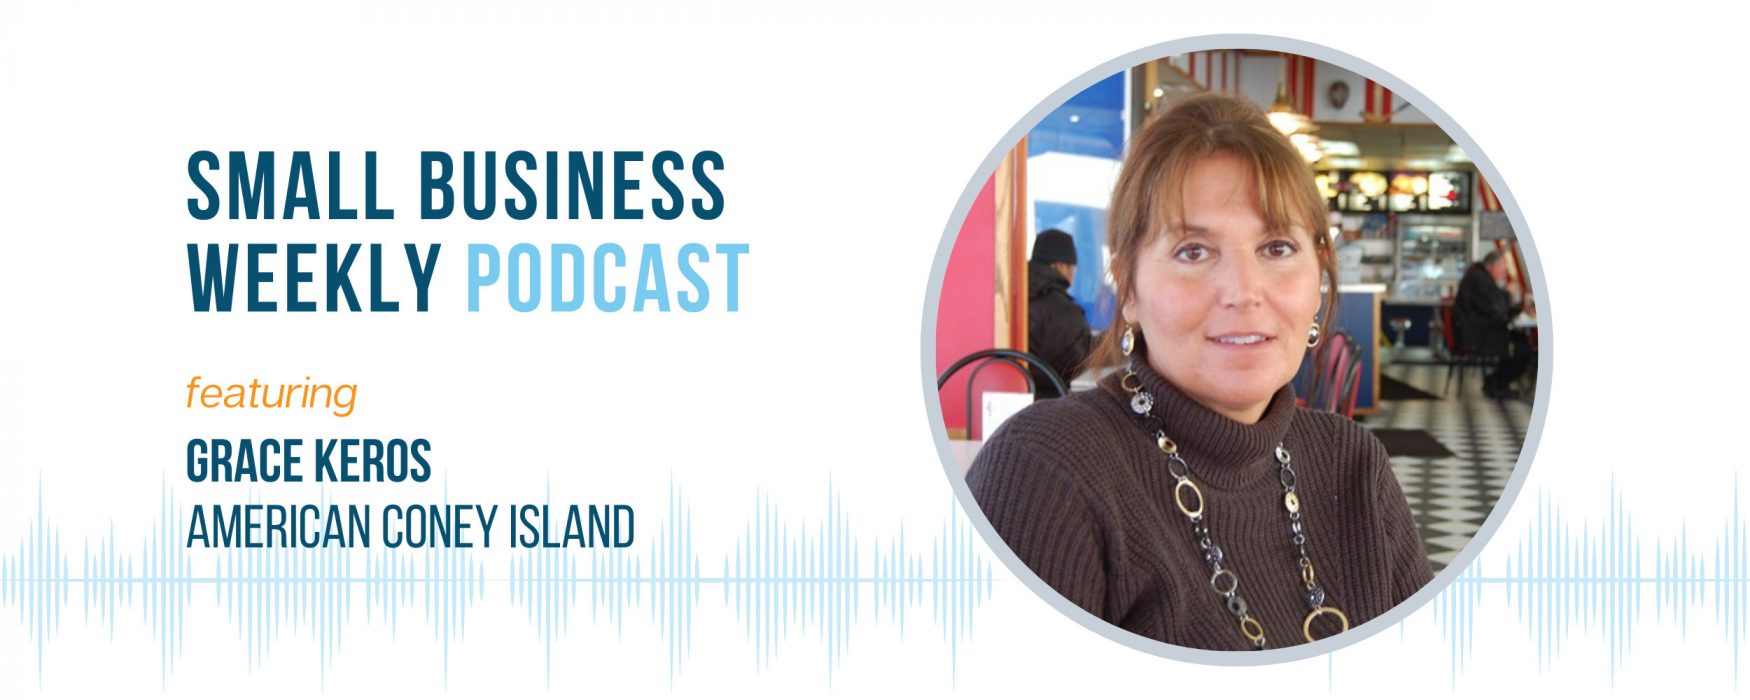 Small Business Weekly podcast with Grace Keros